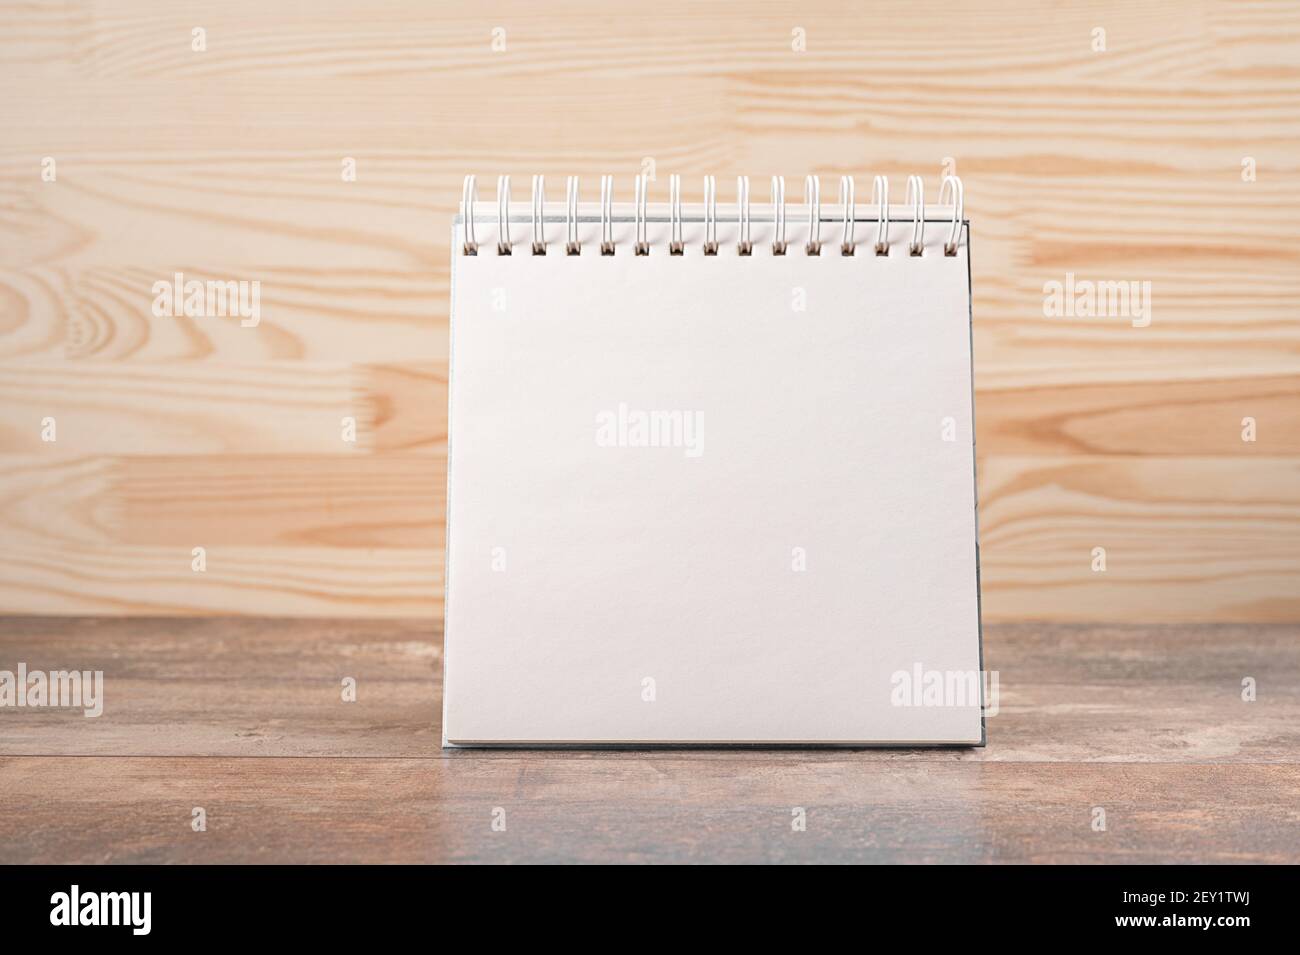 mockup image. square notebook with blank page stands upright on wood table against a wooden wall background. space for your text, message or design. B Stock Photo